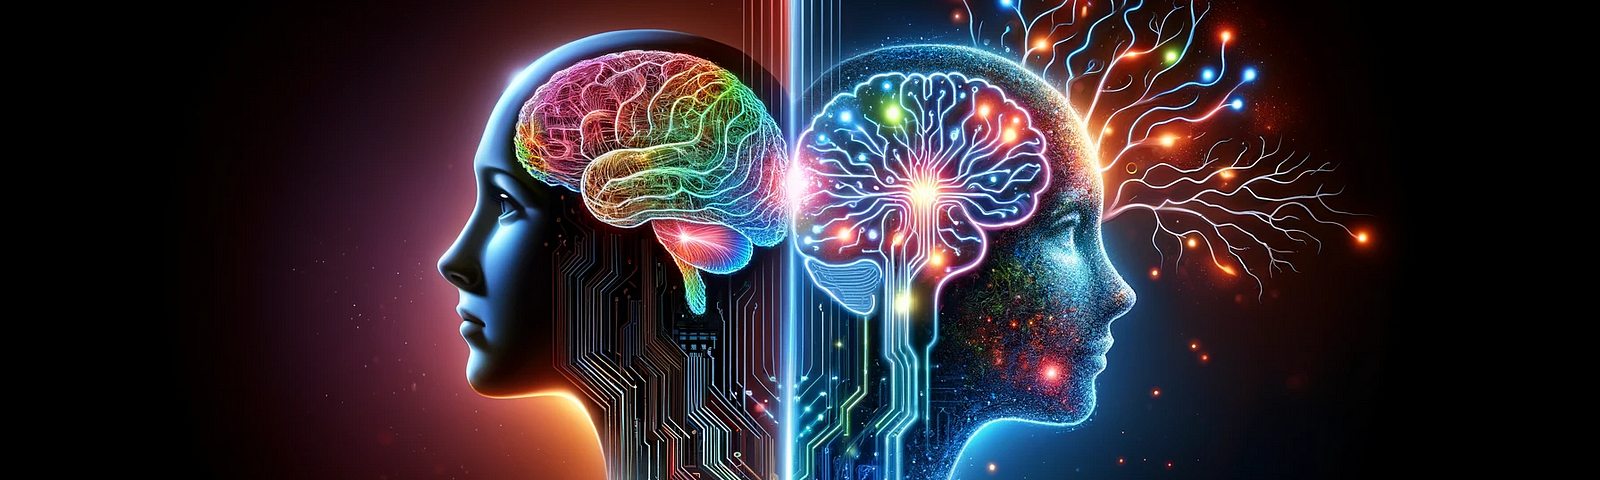 Conceptual image depicting the parallel evolution of a human brain and AI circuitry for the article ‘Evolving with AI: My Journey of Growth and Adaptation’, showcasing the synergy between personal development and technological advancement.